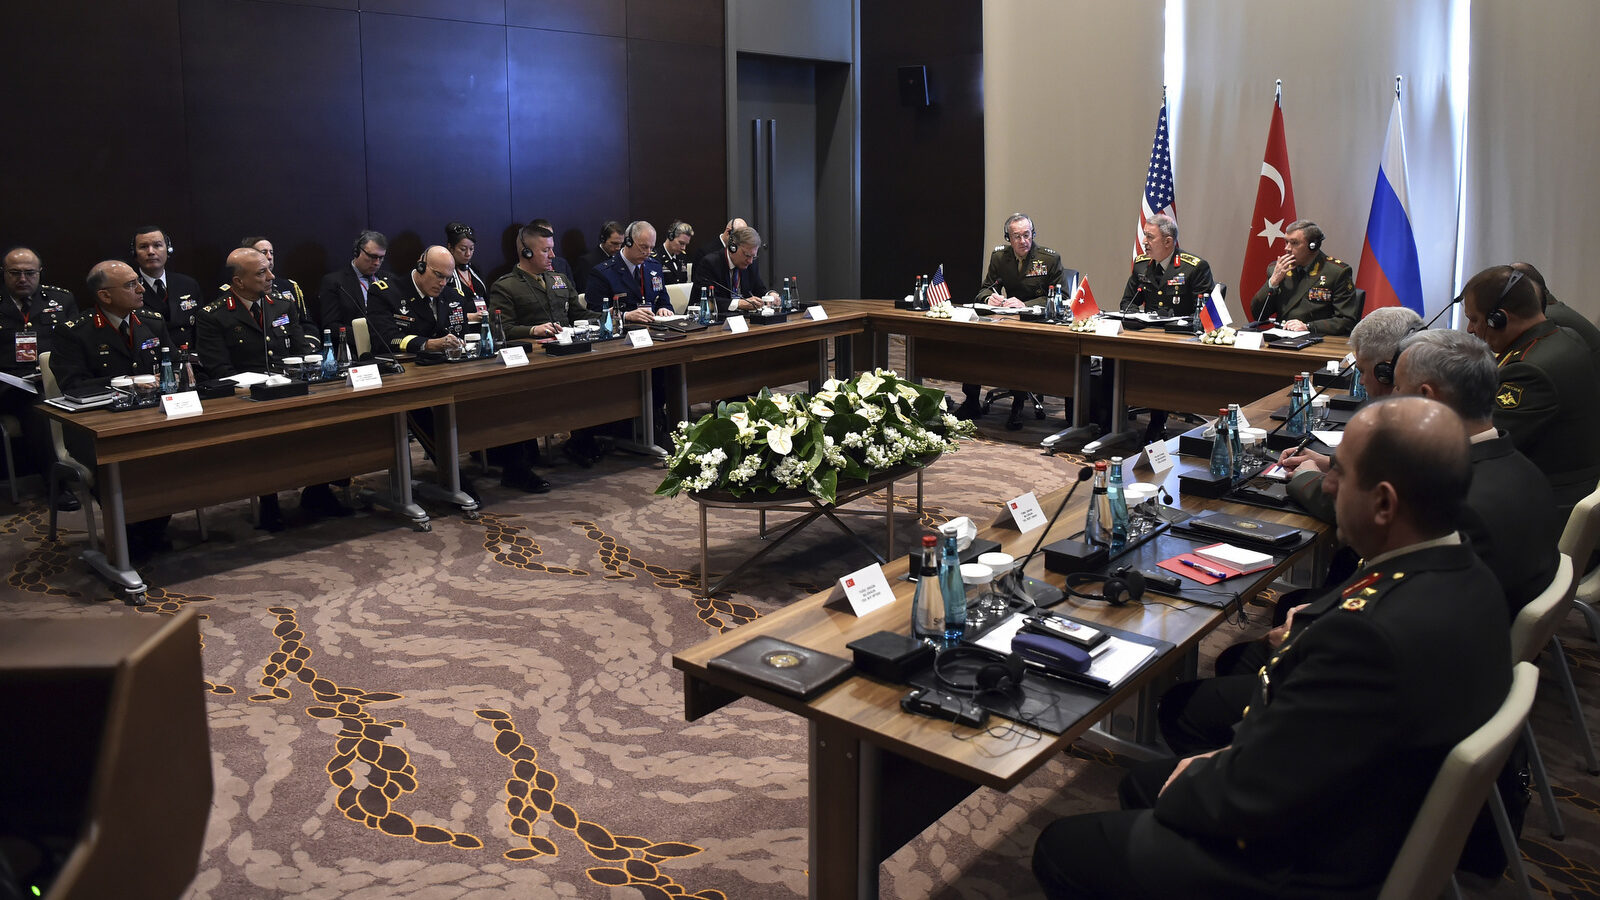 Turkey's Chief of Staff Gen. Hulusi Akar, center, U.S. Chairman of the Joint Chiefs of Staff Gen. Joseph Dunford, left, and Russia's Chief of Staff Gen. Valery Gerasimov and their delegations attend a meeting in the Mediterranean coastal city of Antalya, Turkey, Tuesday, March 7, 2017. Turkey's military says the Turkish, U.S. and Russian chiefs of military staff are meeting in southern Turkey to discuss developments in Syria and Iraq. The meeting comes amid renewed Turkish threats to hit U.S.-backed Syrian Kurdish targets in the northern Syrian city of Manbij. (Turkish Military, Pool Photo via AP)